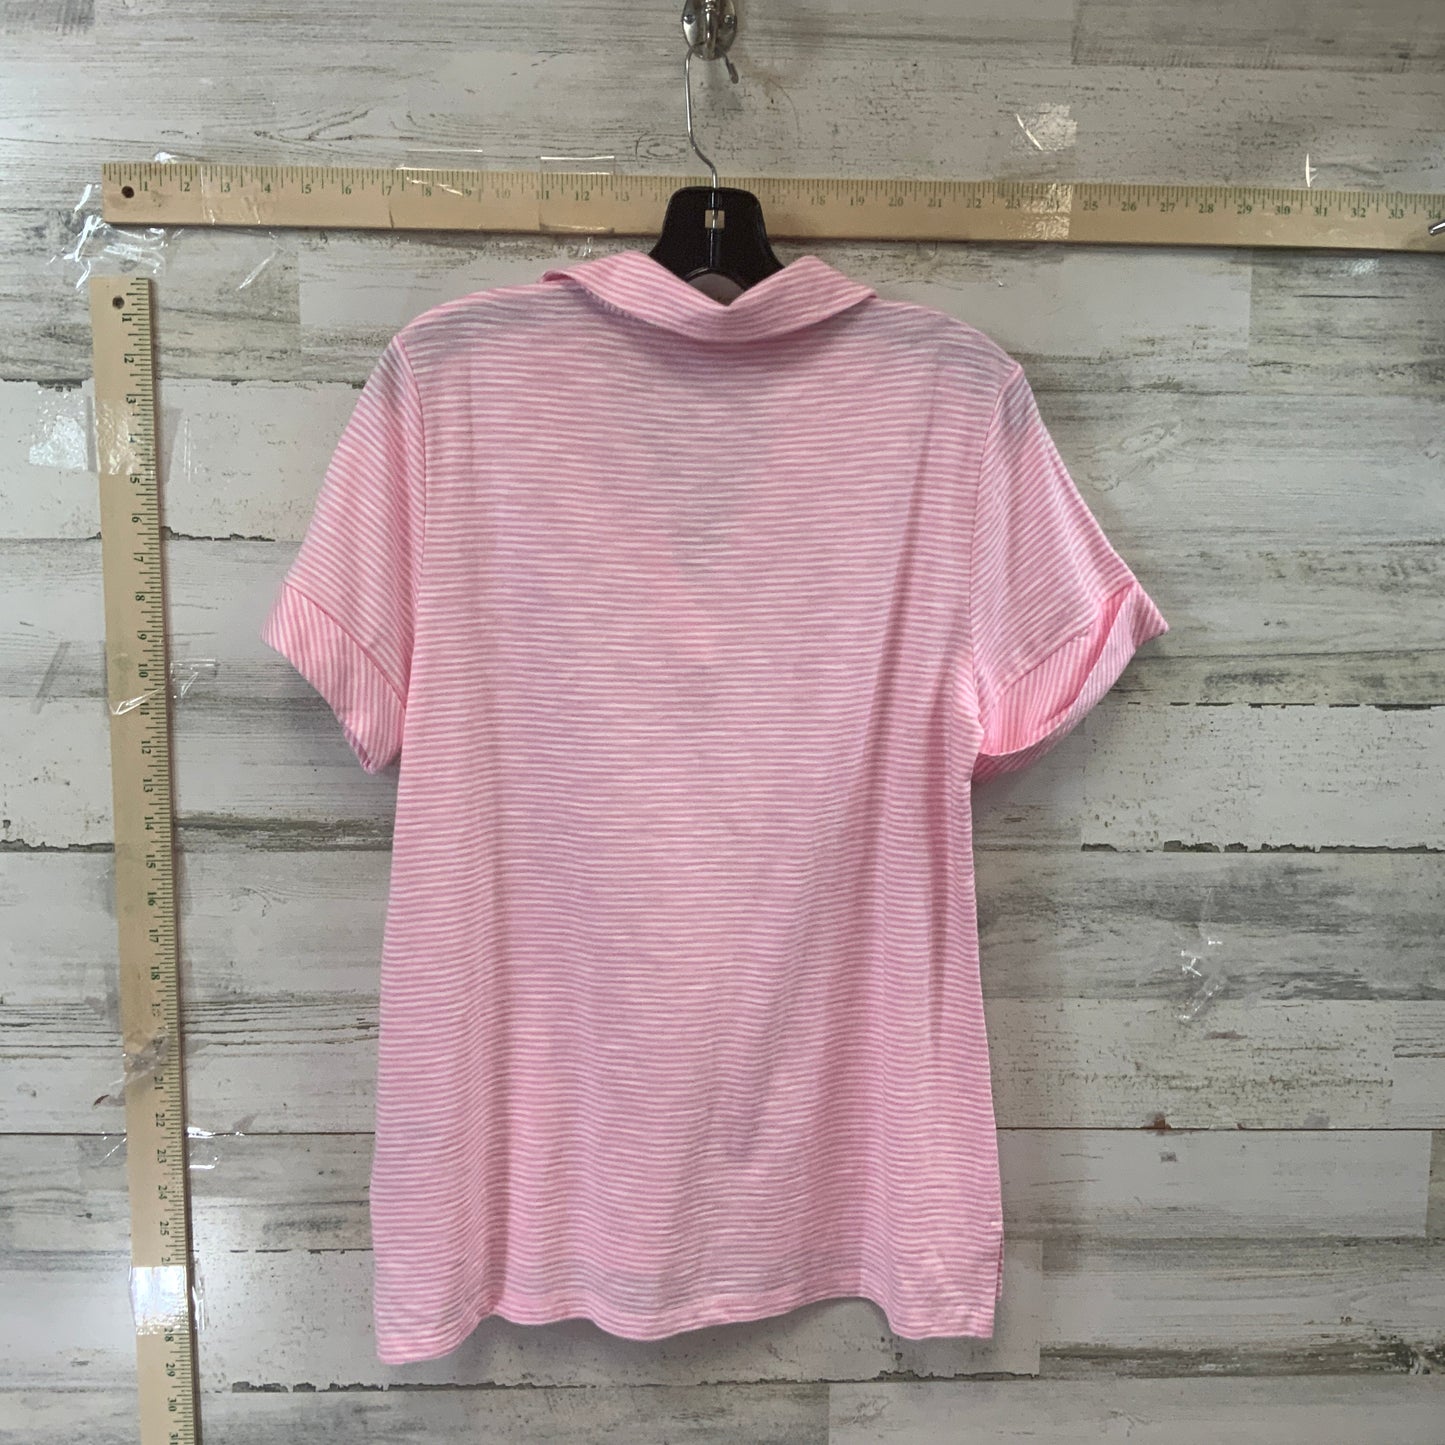 Pink & White Top Short Sleeve Talbots, Size M